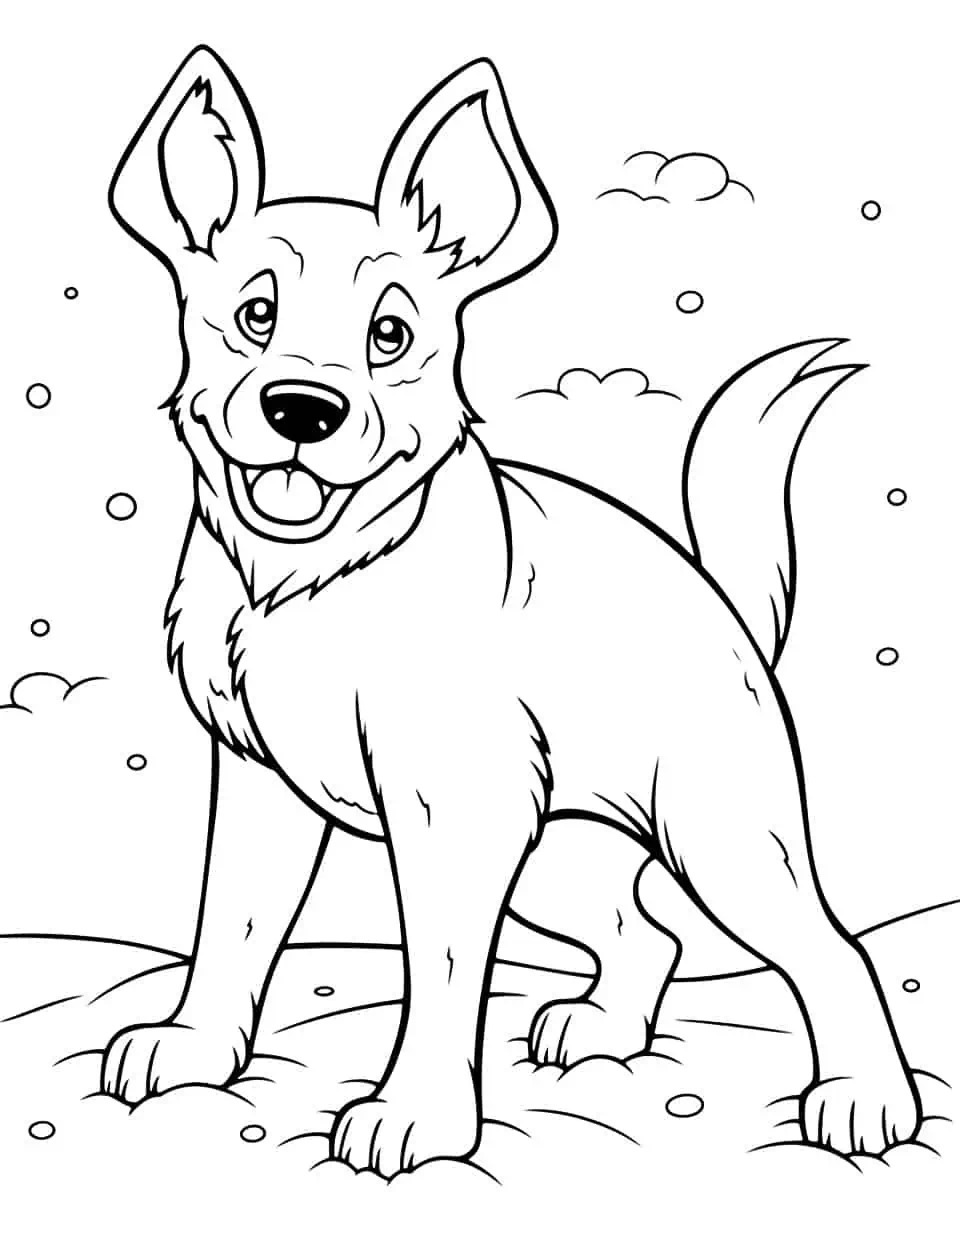 German Shepherd in the Snow Dog Coloring Page - A German Shepherd playing in the snow, trying to catch snowflakes.